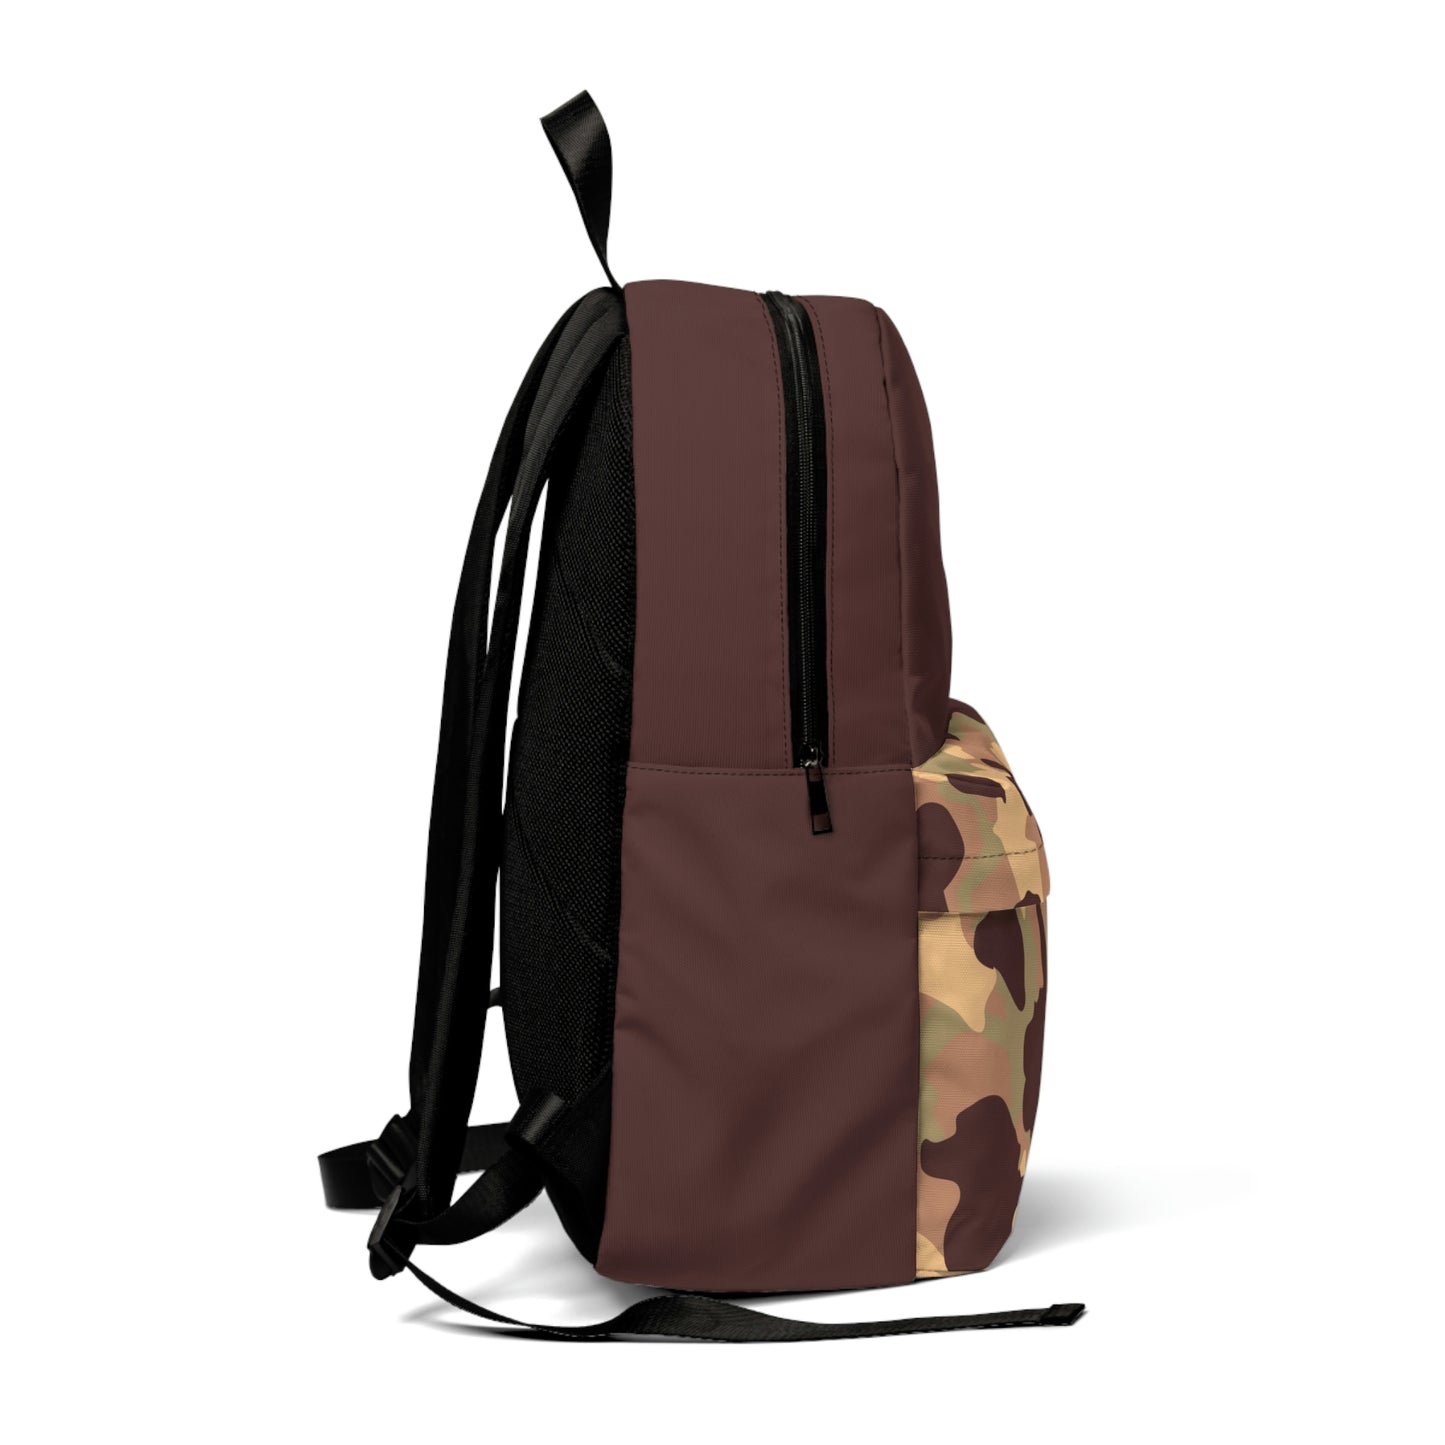 Dark brown backpack with "Duntalk" print written in light brown on the large pocket. Camouflage in green, brown, light brown, and nude on the smaller pocket. Black covering the backside where the straps are.